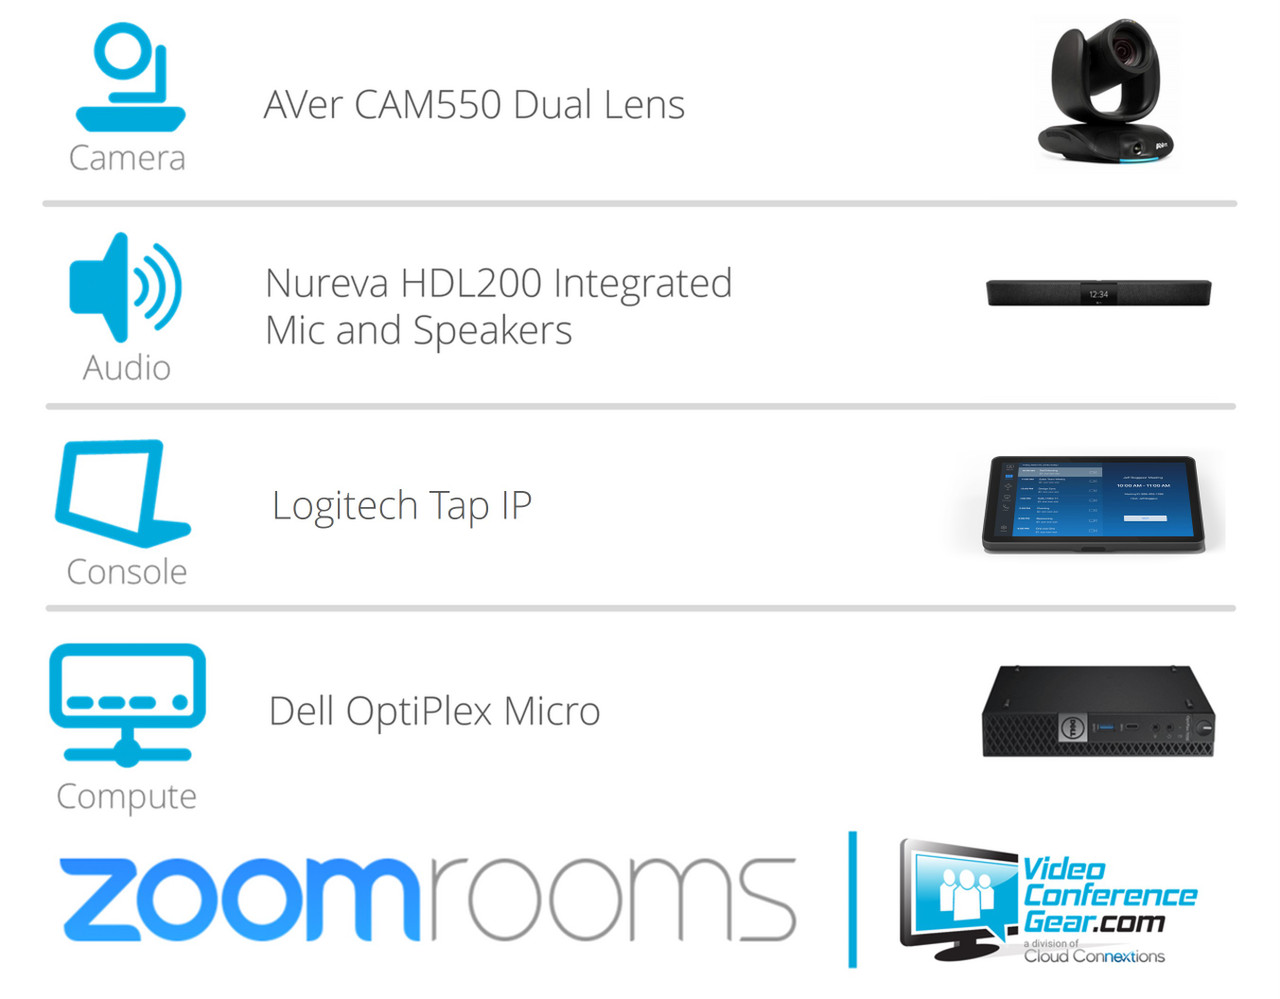 Zoom Rooms Solution with AVer CAM550 and Nureva HDL200 - Medium Room